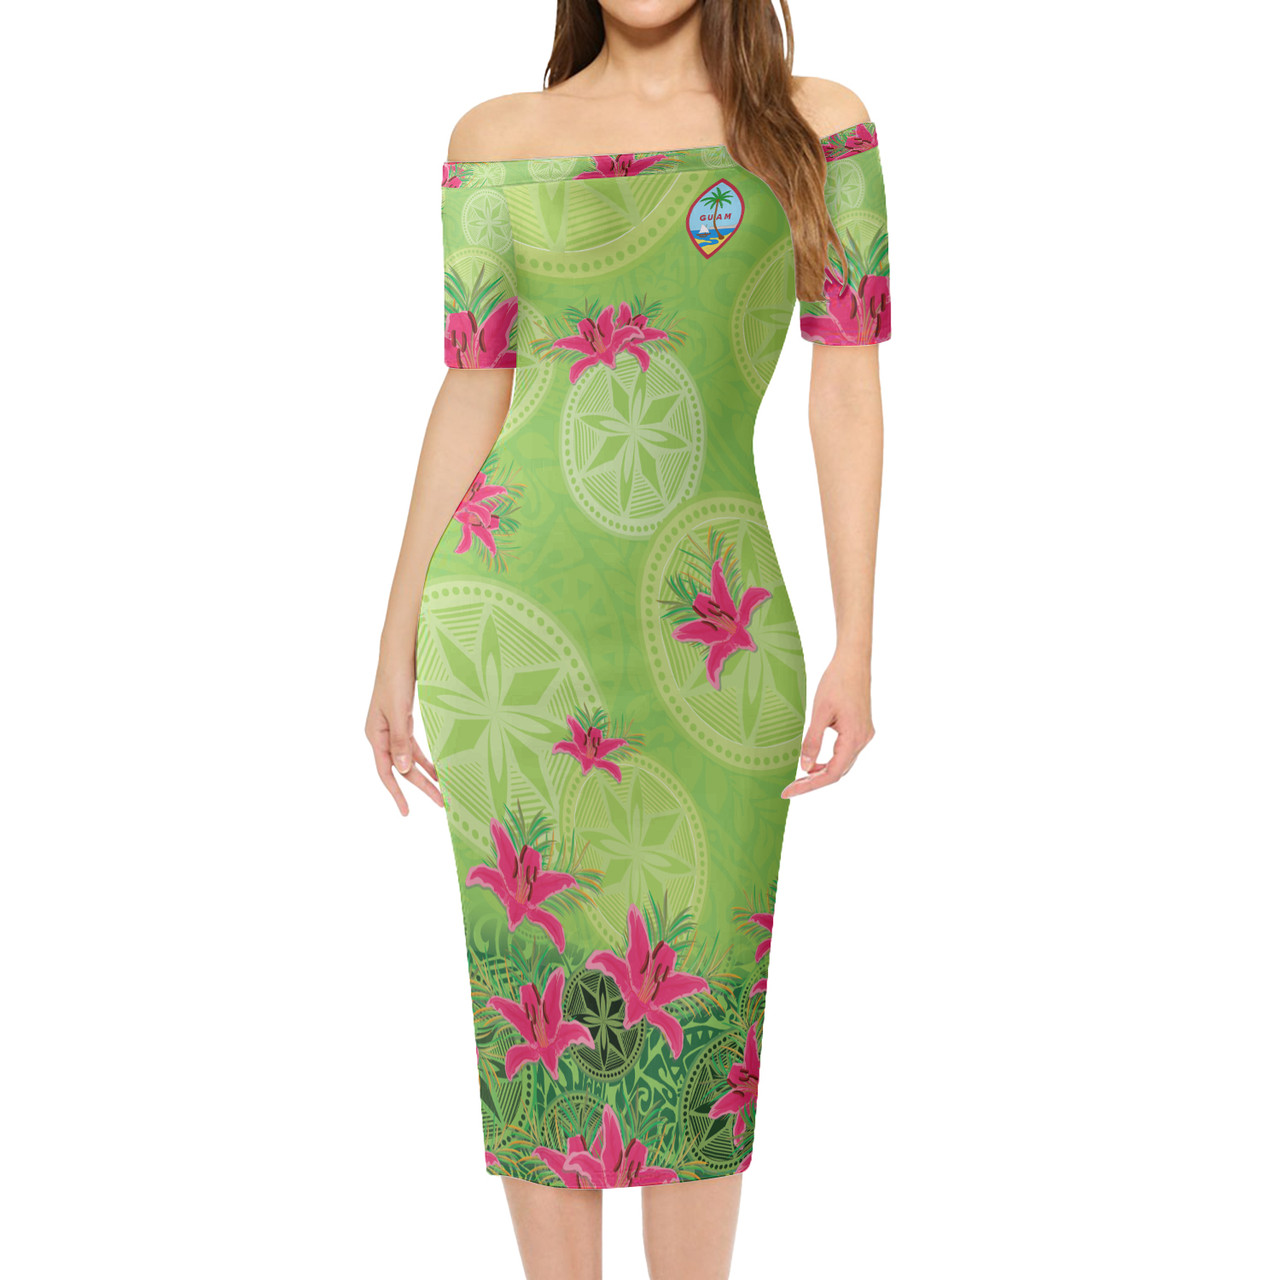 Guam Short Sleeve Off The Shoulder Lady Dress Lilies With Polynesian Pattern